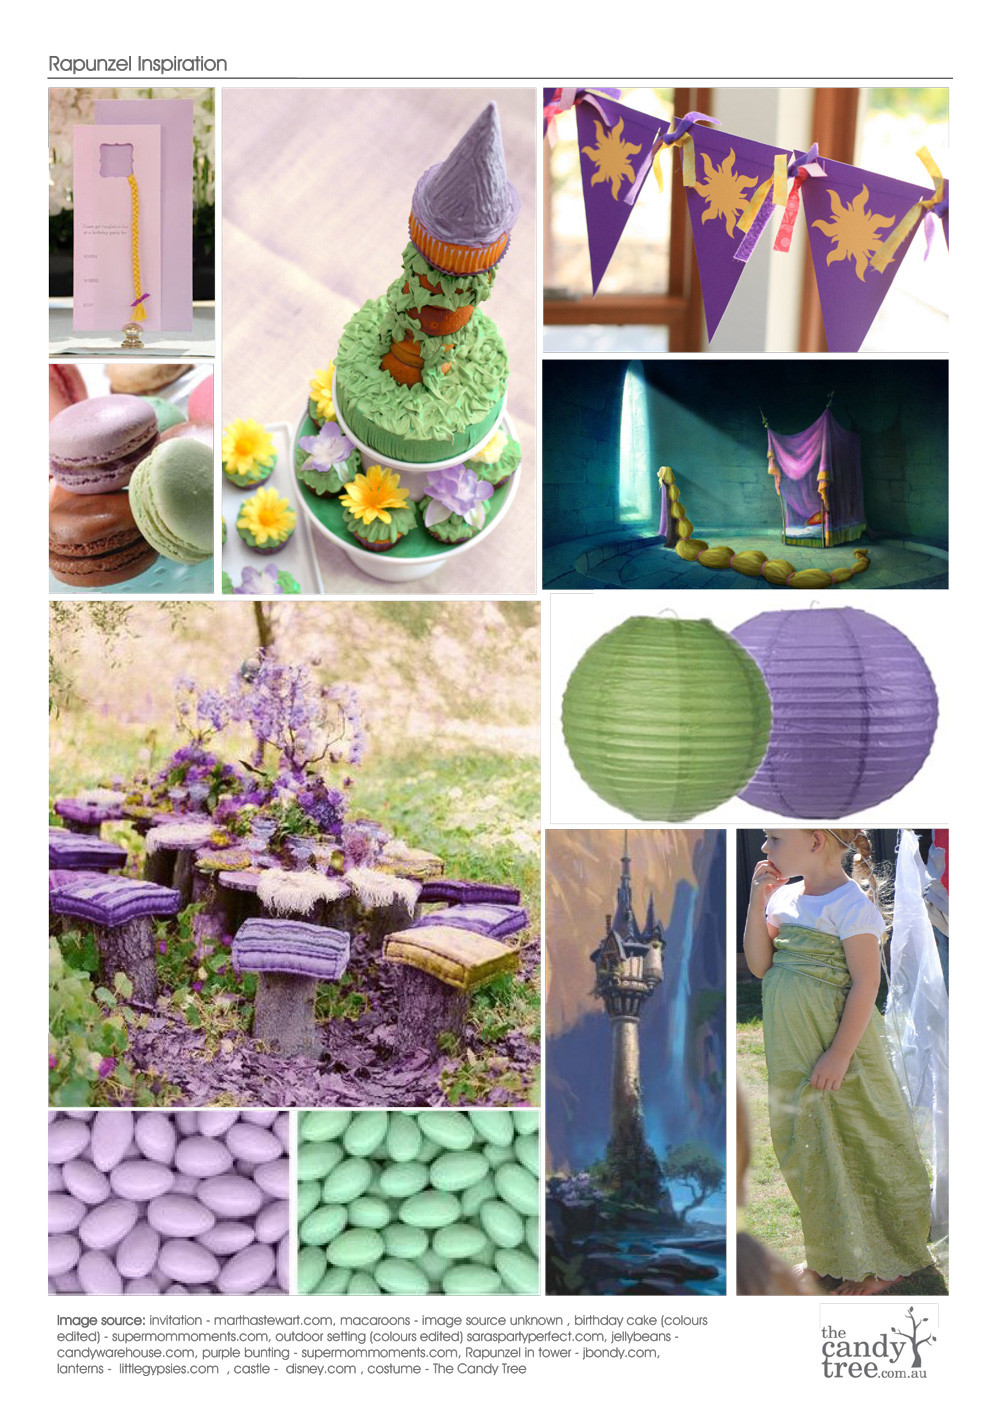 Best ideas about Rapunzel Birthday Party
. Save or Pin Sweet Little Parties inspiration rapunzel party inspiration Now.